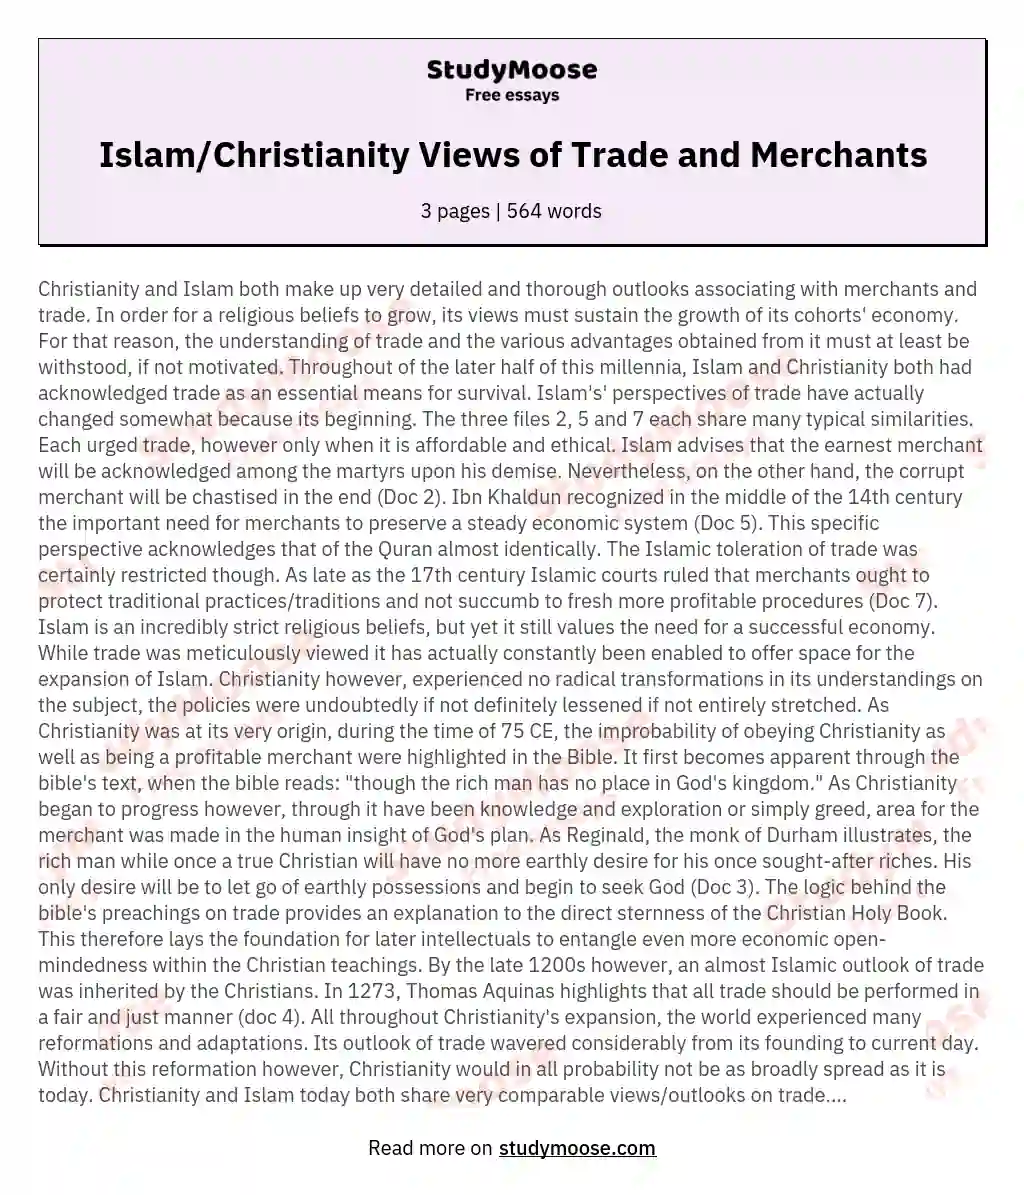 Islam/Christianity Views of Trade and Merchants